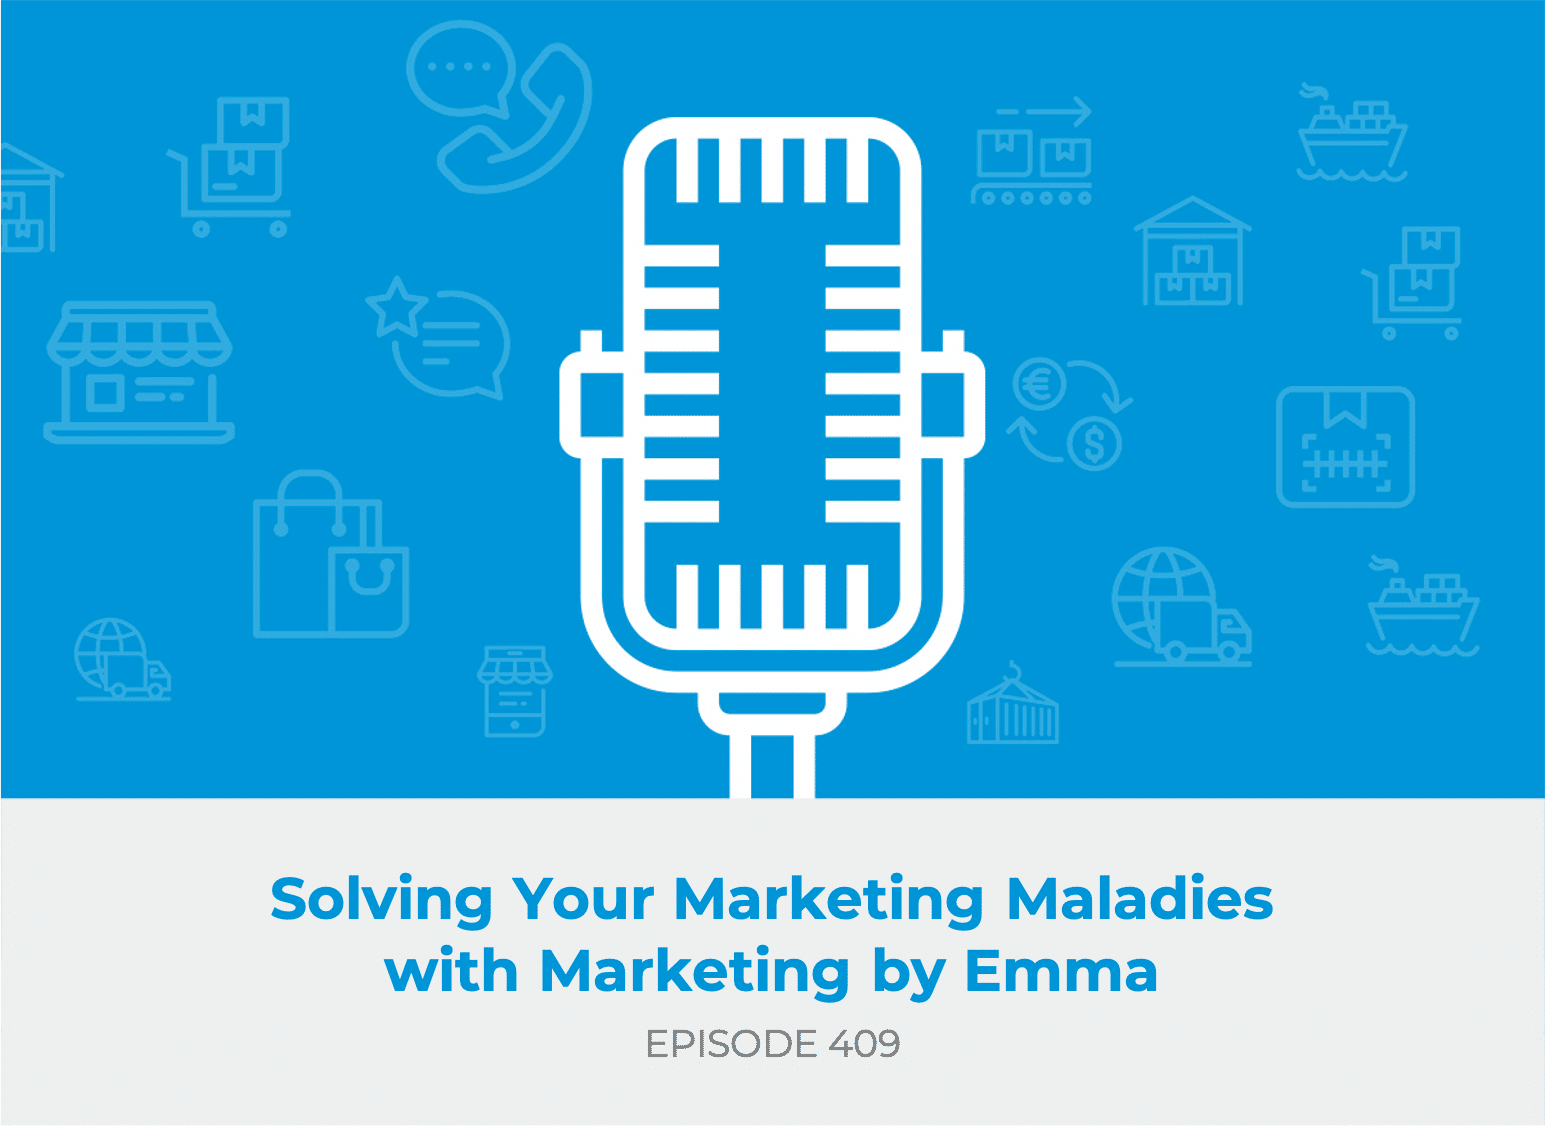 Solving Your Marketing Maladies with Marketing by Emma